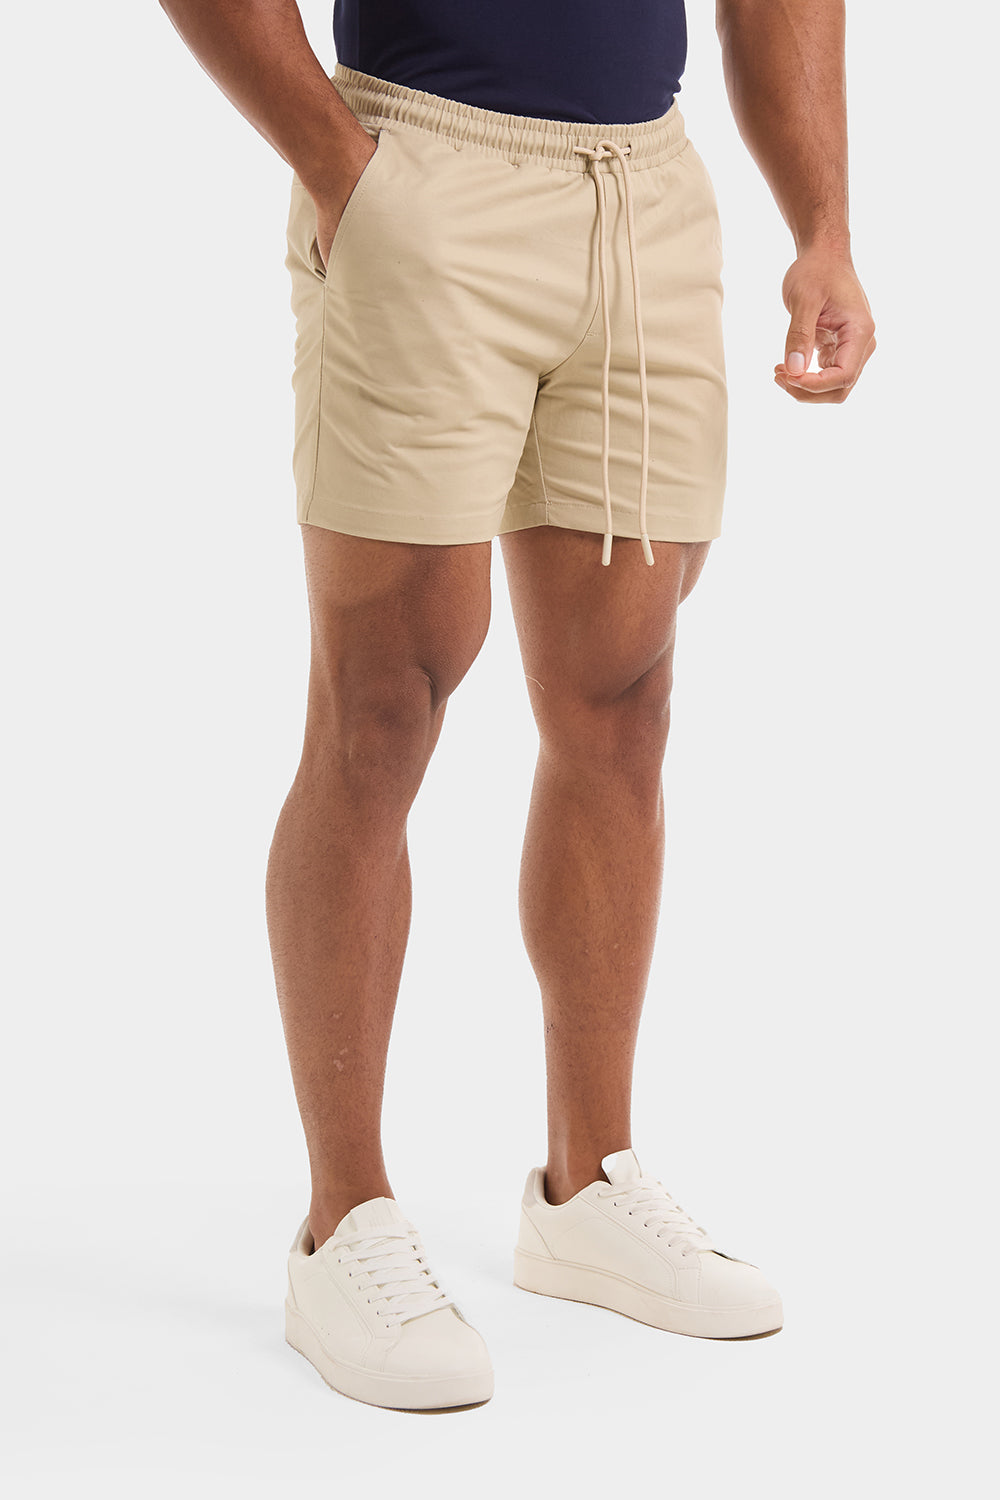 Muscle Fit Drawstring Chino Short - Shorter Length in Stone - TAILORED ATHLETE - ROW